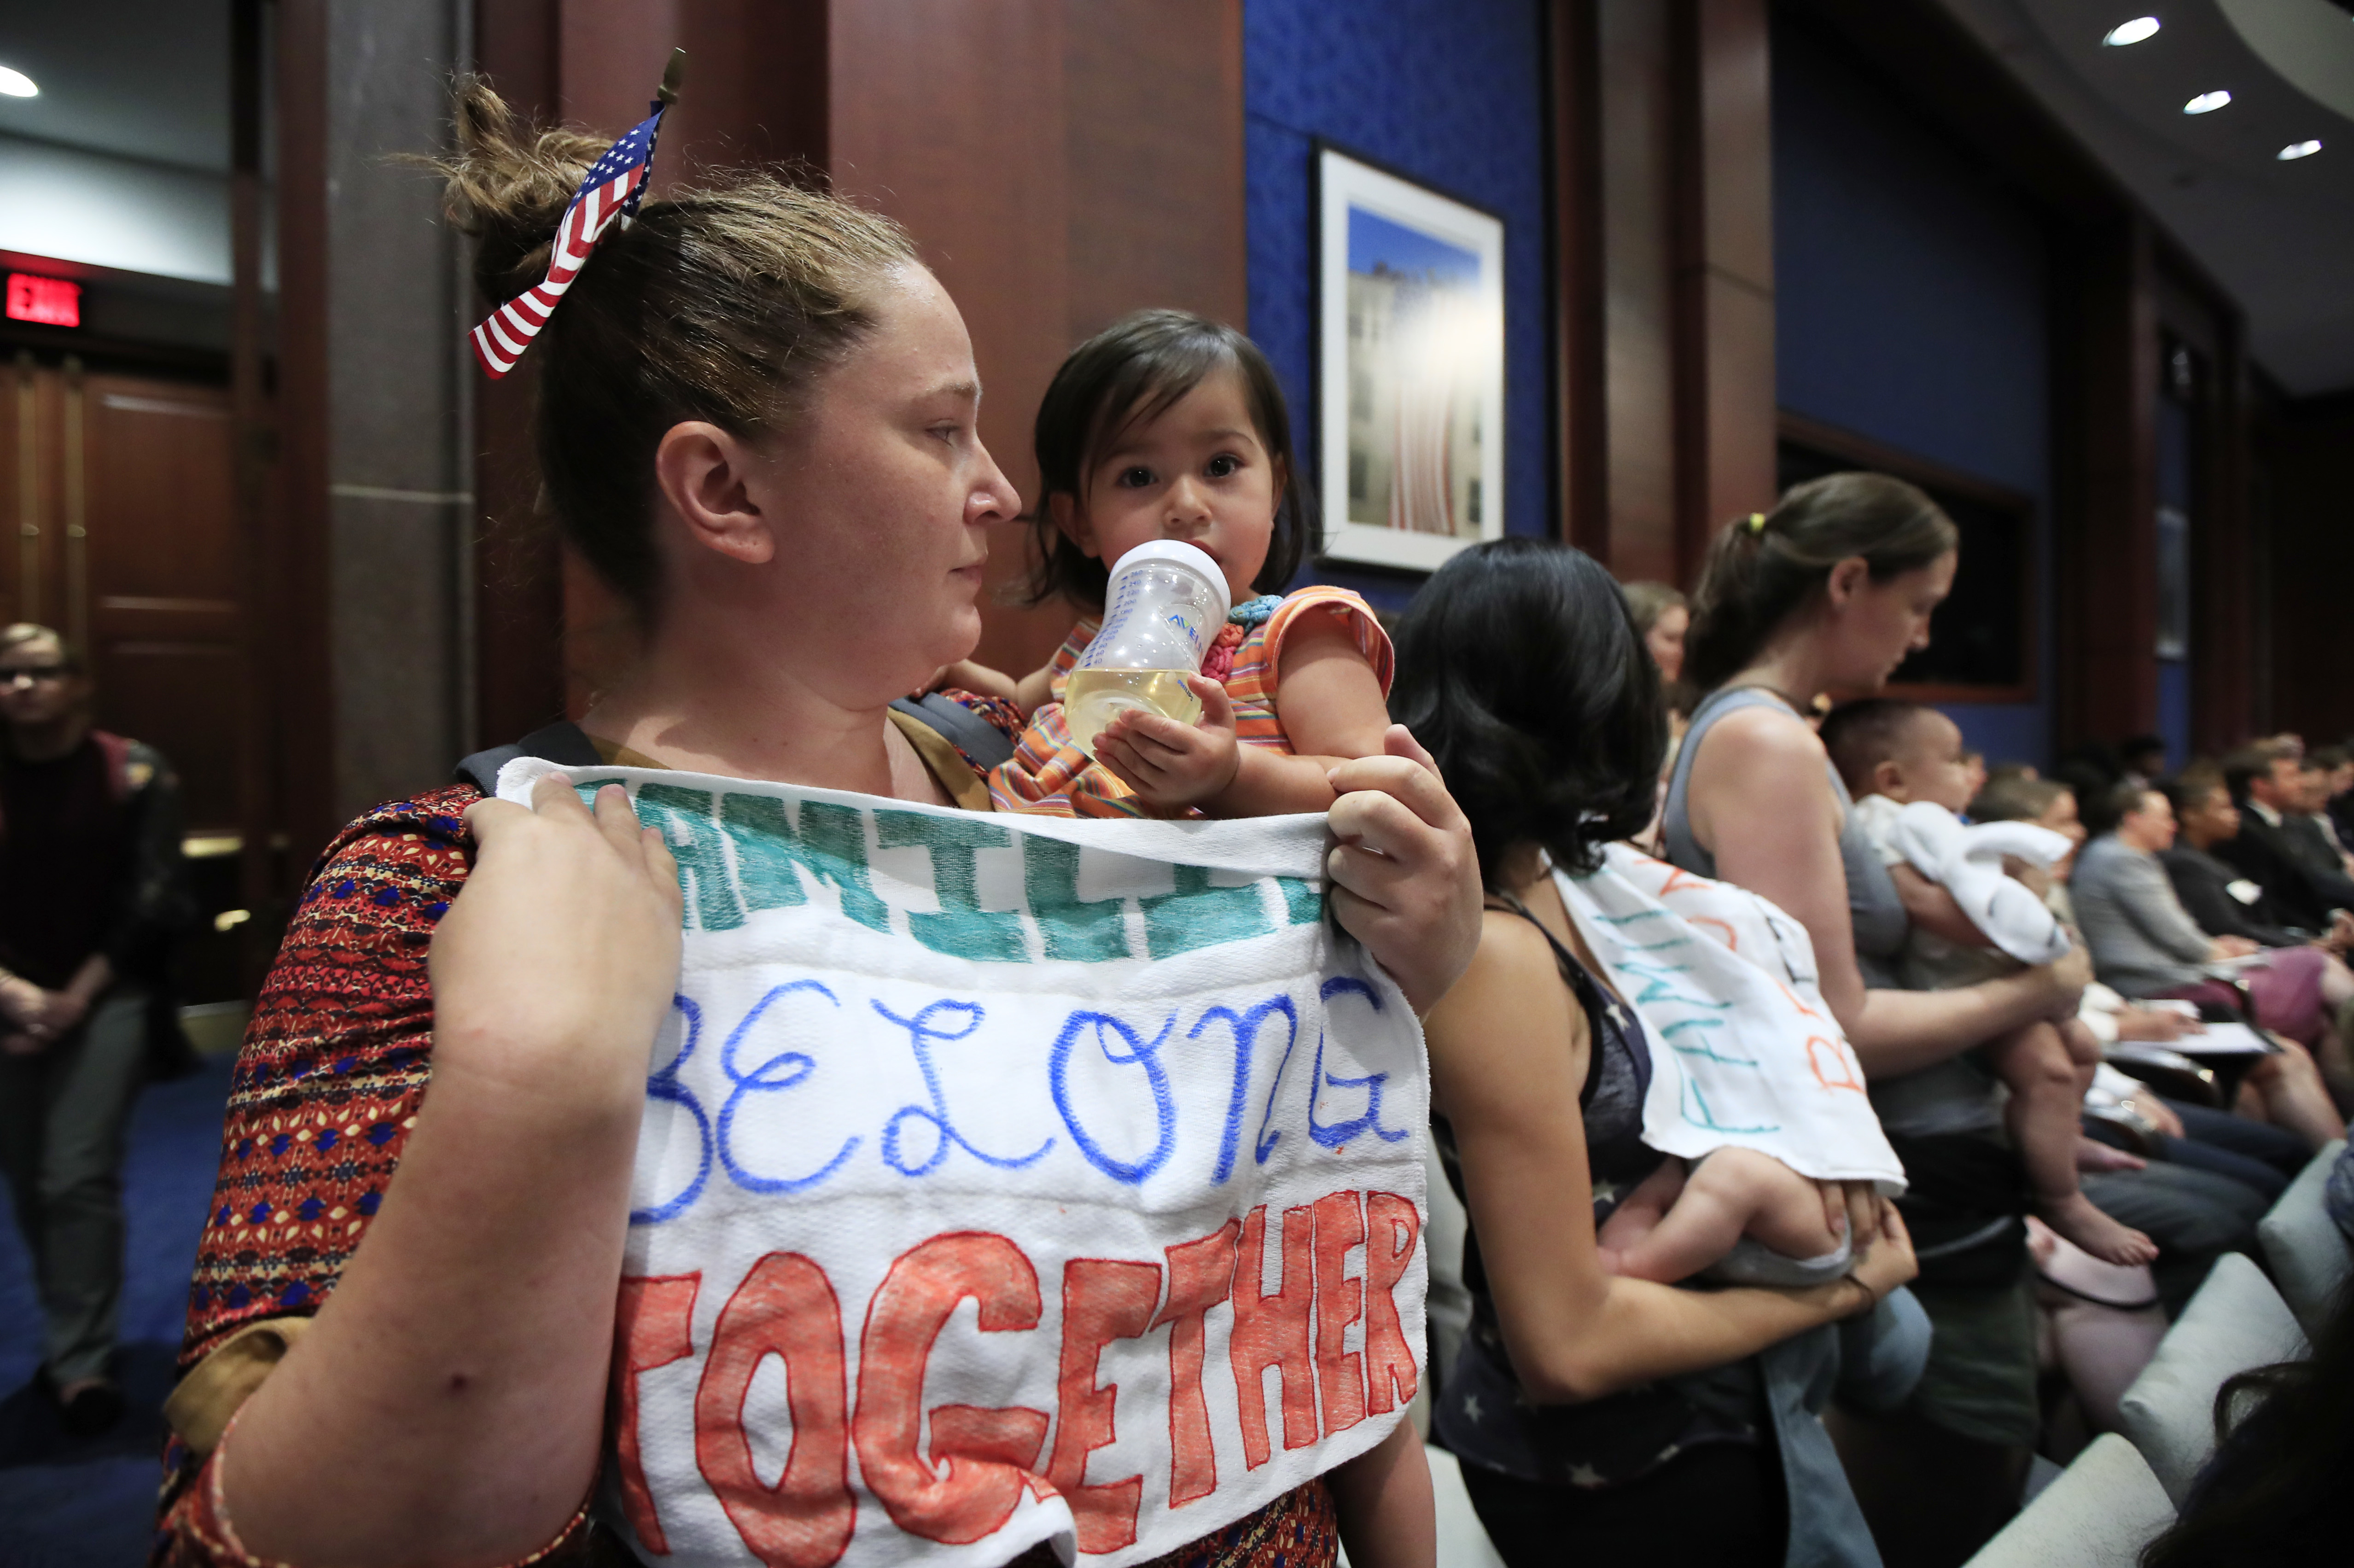 Lucy Martin and her daughter Branwen Espinal together with other mothers and their babies, attend a House Committee on the Judiciary and House Committee on Oversight and Government Reform hearing, to express their support and sympathy to immigrants and their families and objection to the forced separation of migrant children from their parents, on Capitol Hill in Washington, Tuesday, June 19, 2018. (AP Photo/Manuel Balce Ceneta)